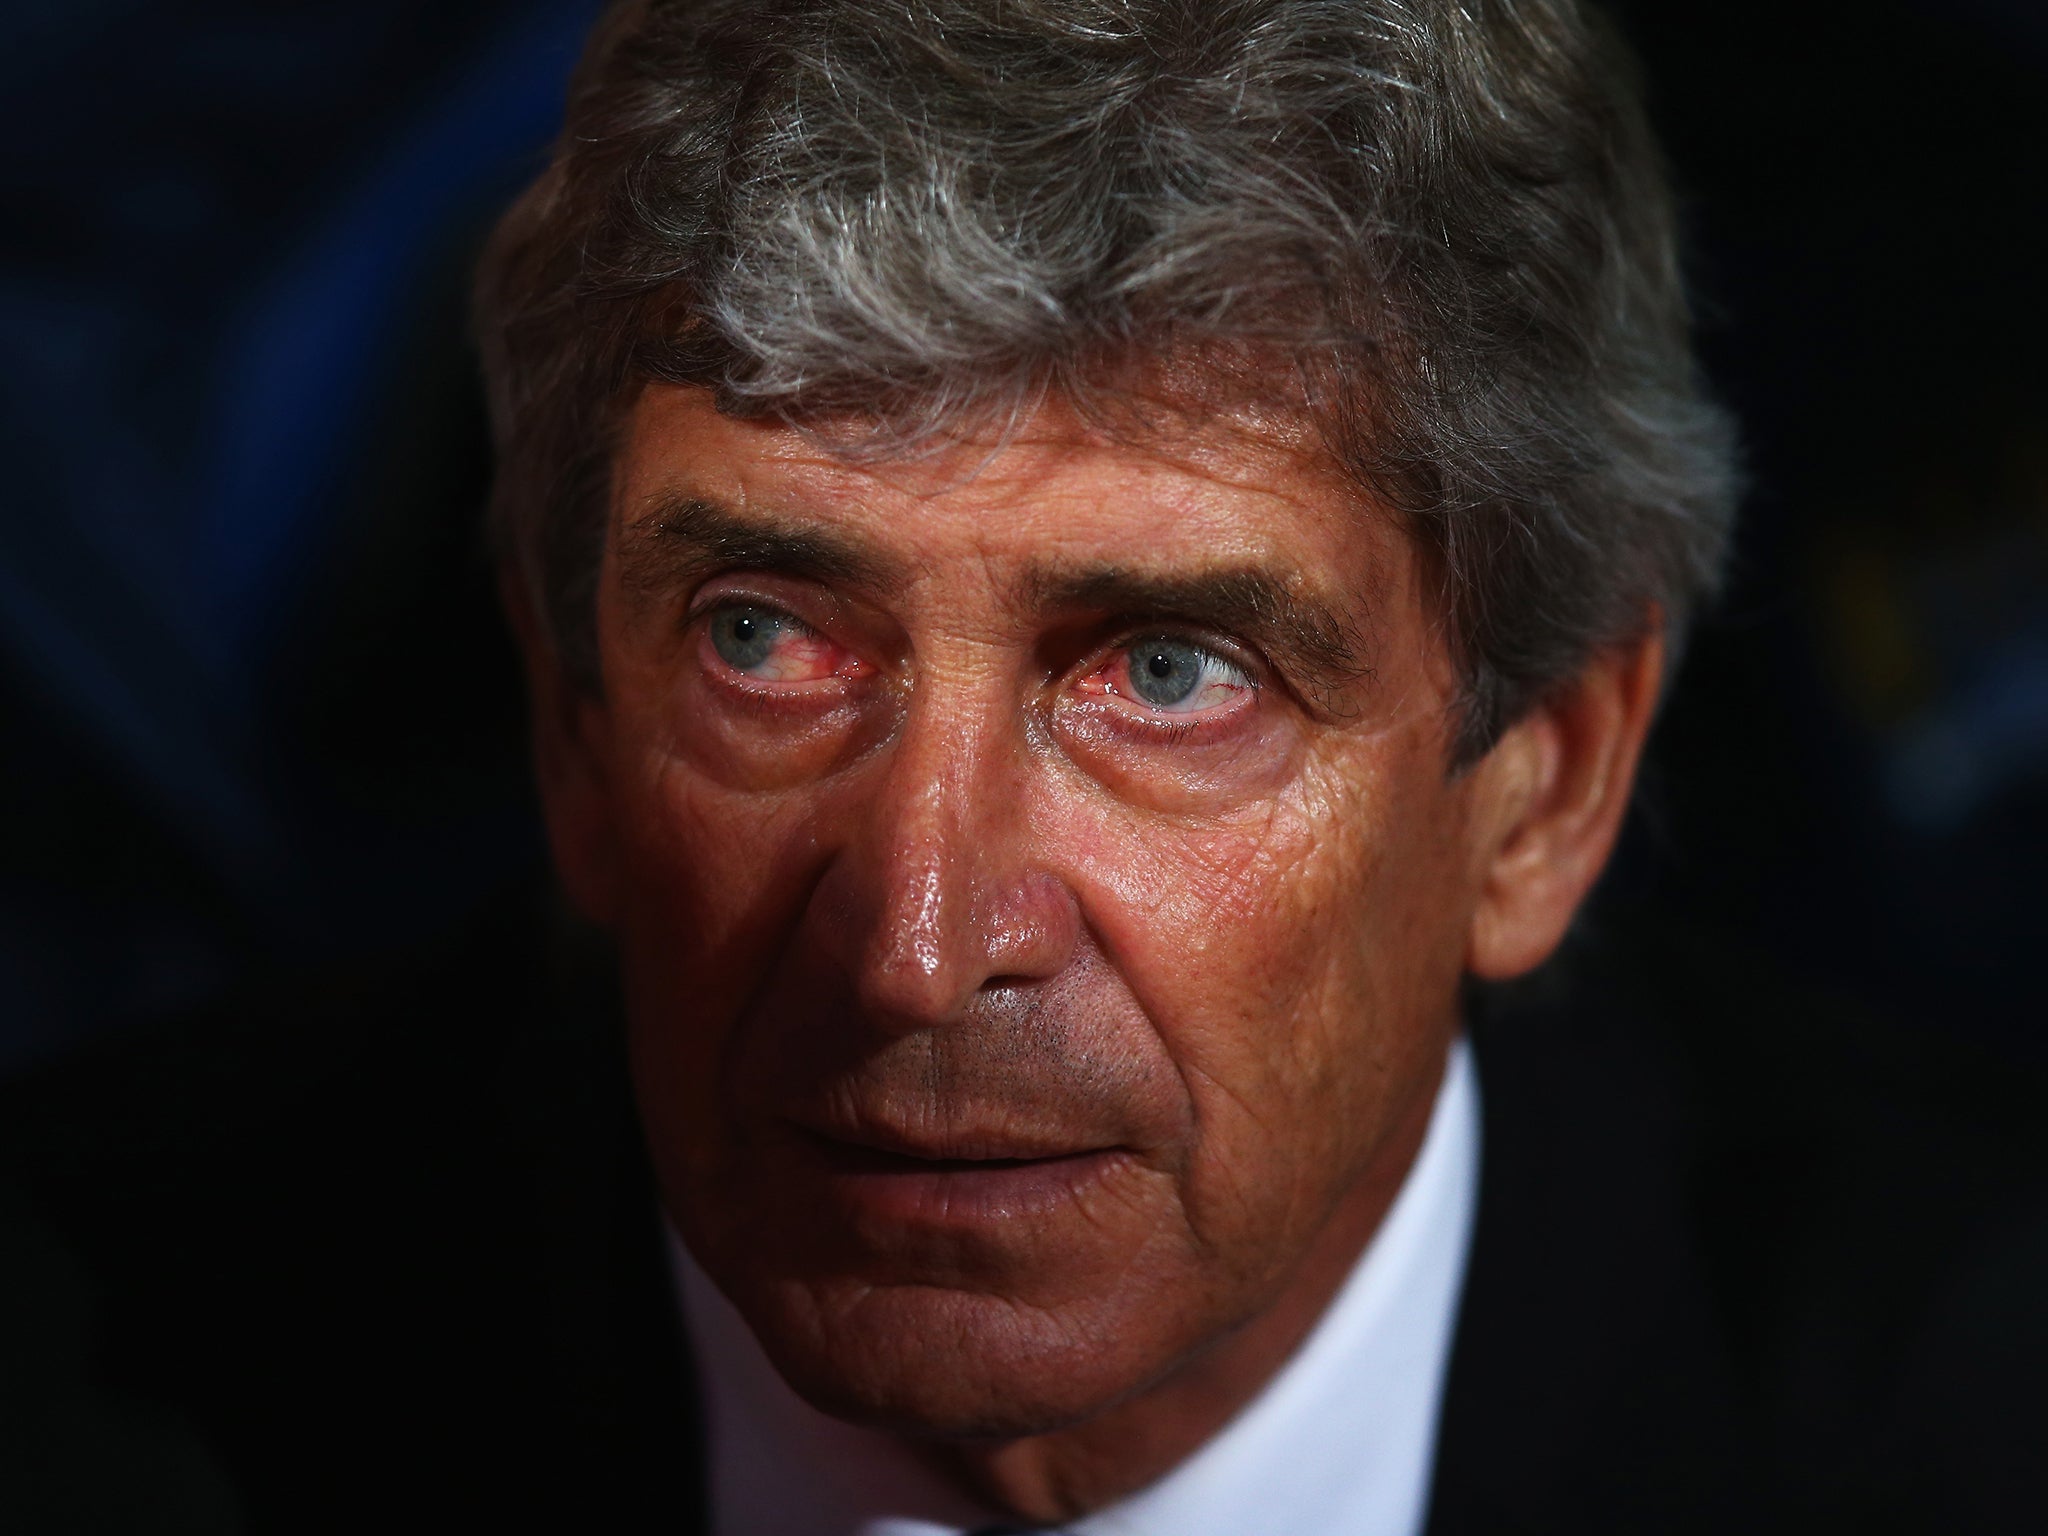 Manuel Pellegrini remains English football’s most enigmatic character